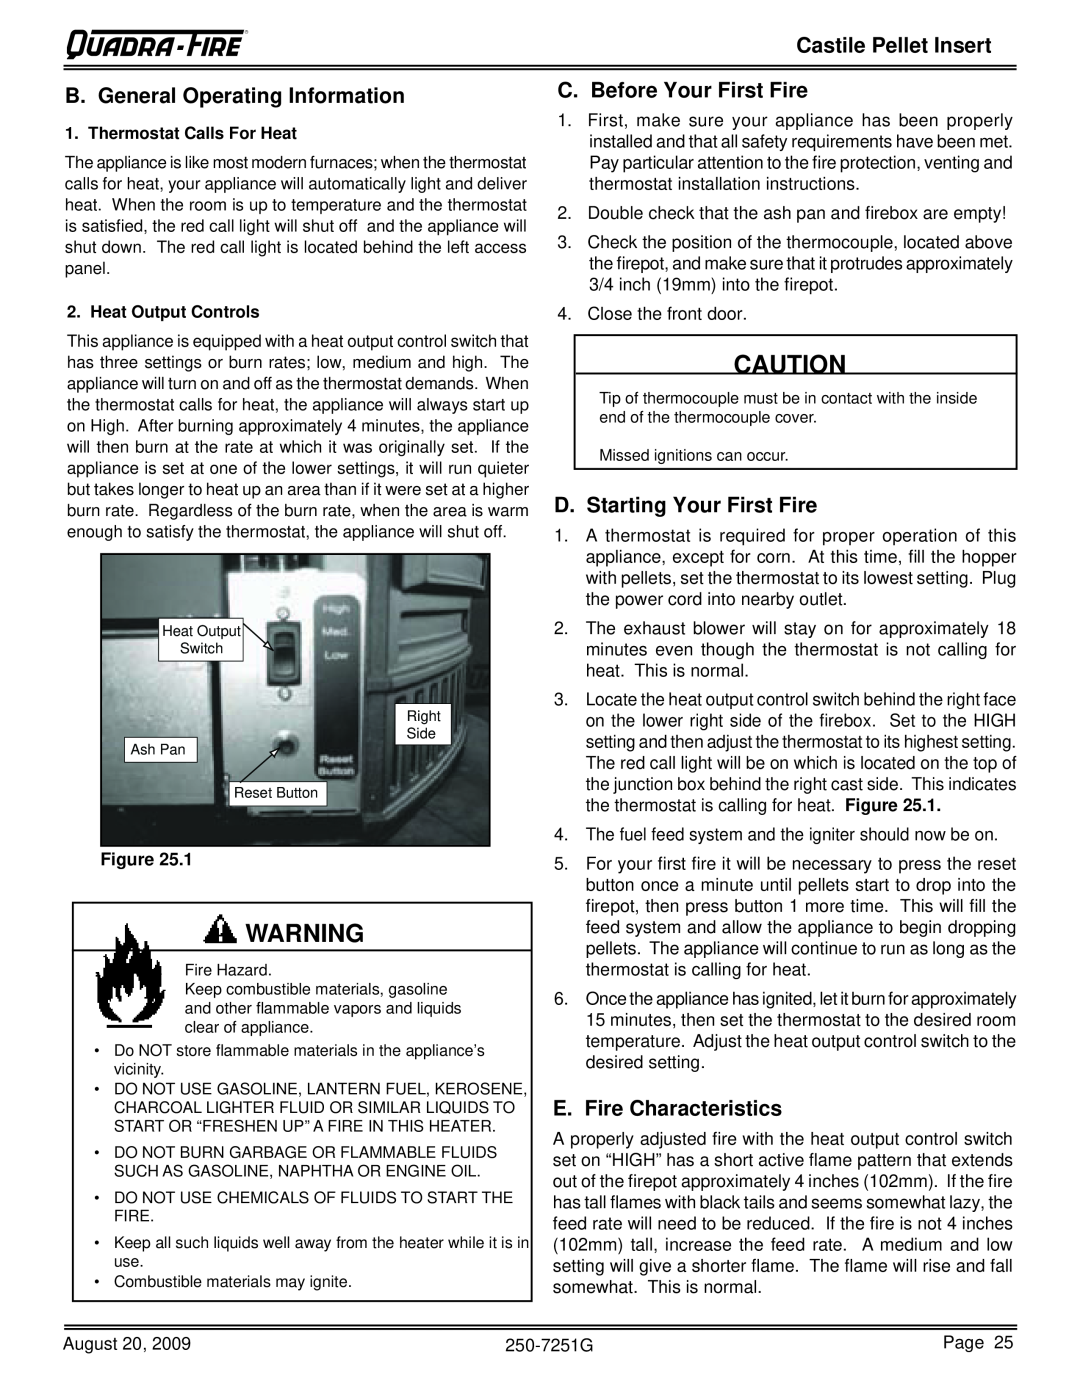 Quadra-Fire CASTINS-CSB B. General Operating Information, C. Before Your First Fire, D. Starting Your First Fire, Figure 